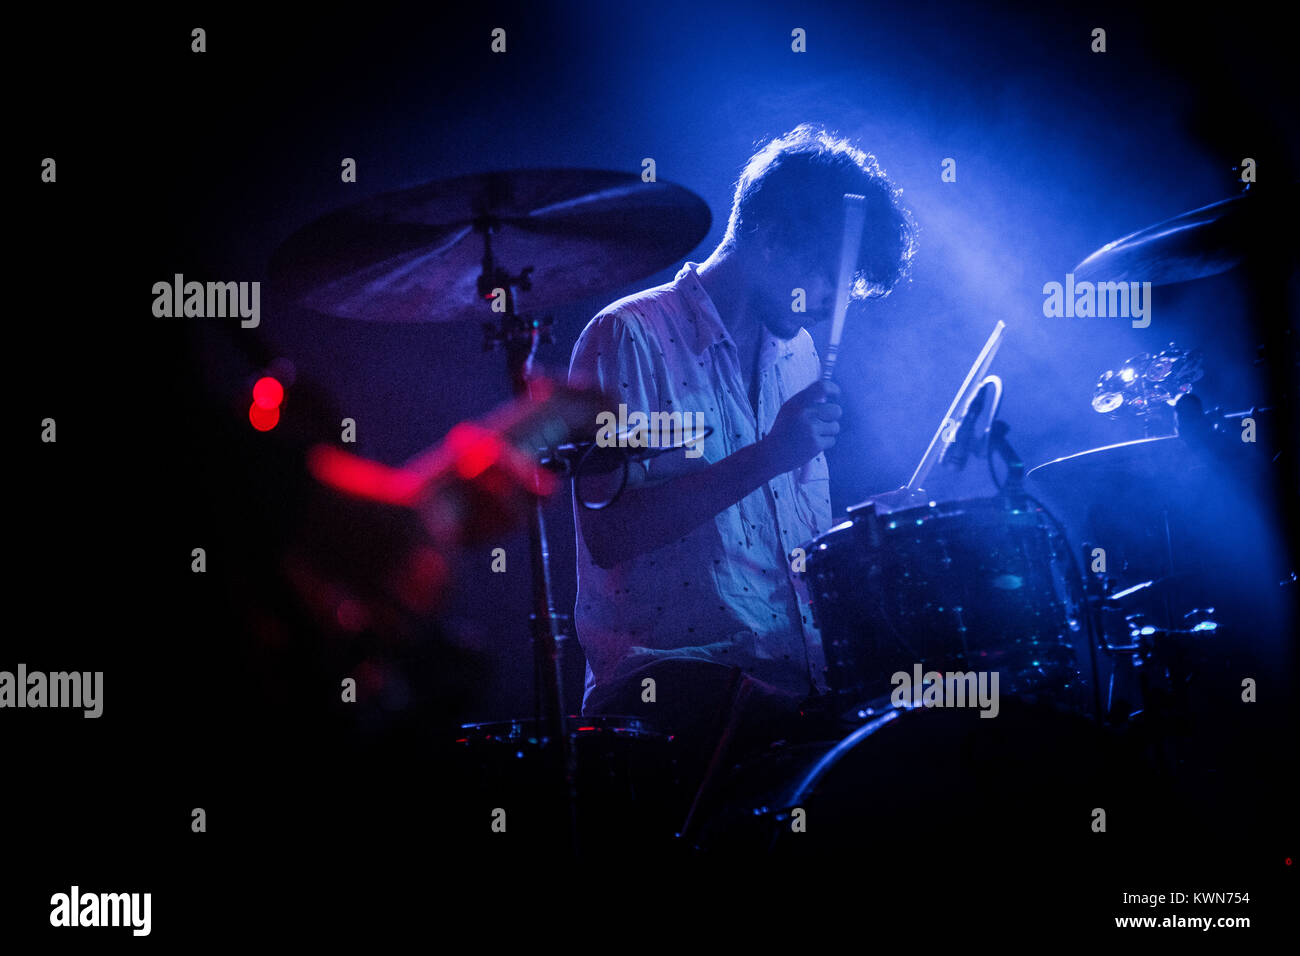 Deerhunter, the American indie rock band, performs a live concert at VEGA in Copenhagen. Here musician Moses Archuleta on drums is seen live on stage. Denmark, 19/11 2015. Stock Photo